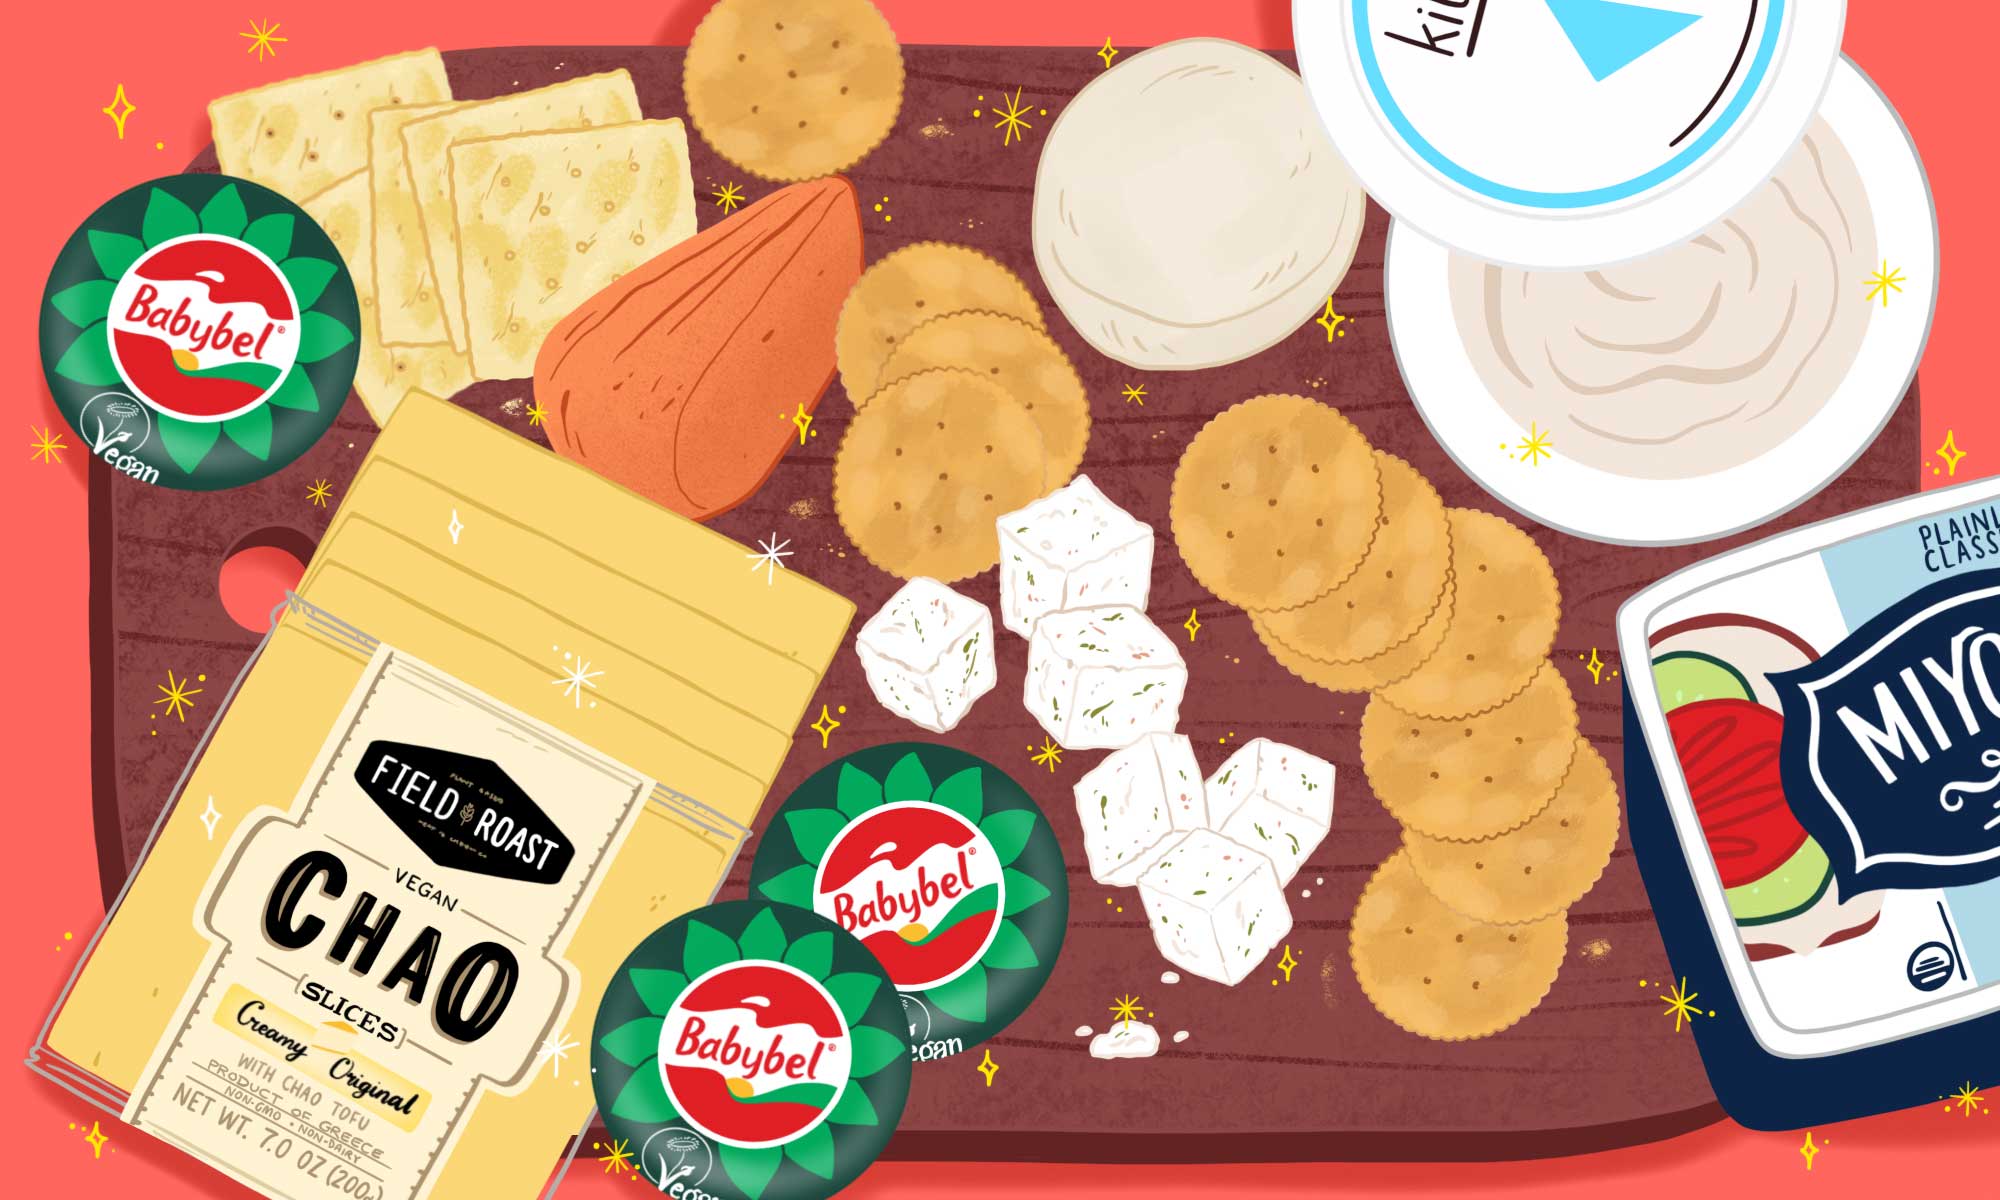 Illustration of various pieces of cheese on a board, with some in their packaging alongside.